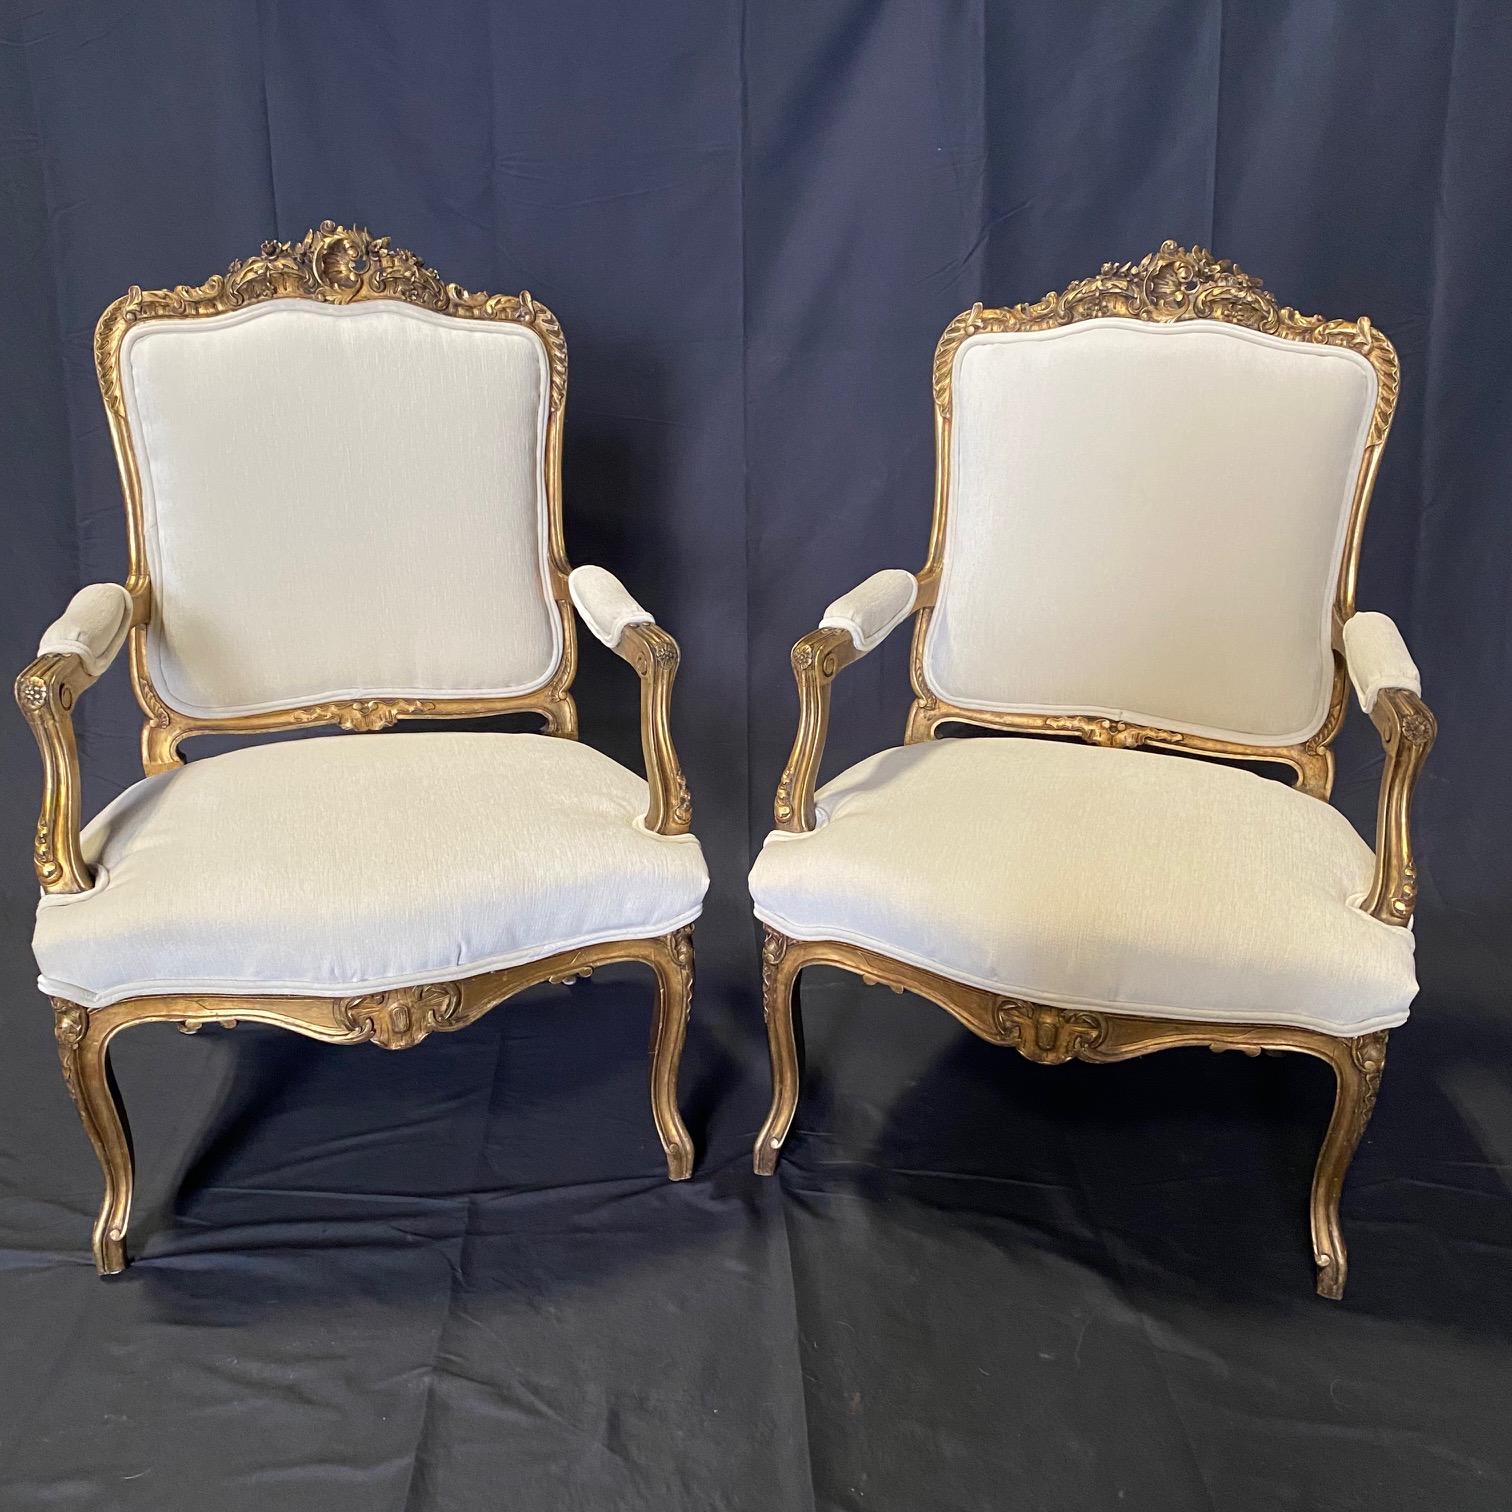  Pair of Antique French Louis XV Fauteuil Gilded Arm Chairs  For Sale 7